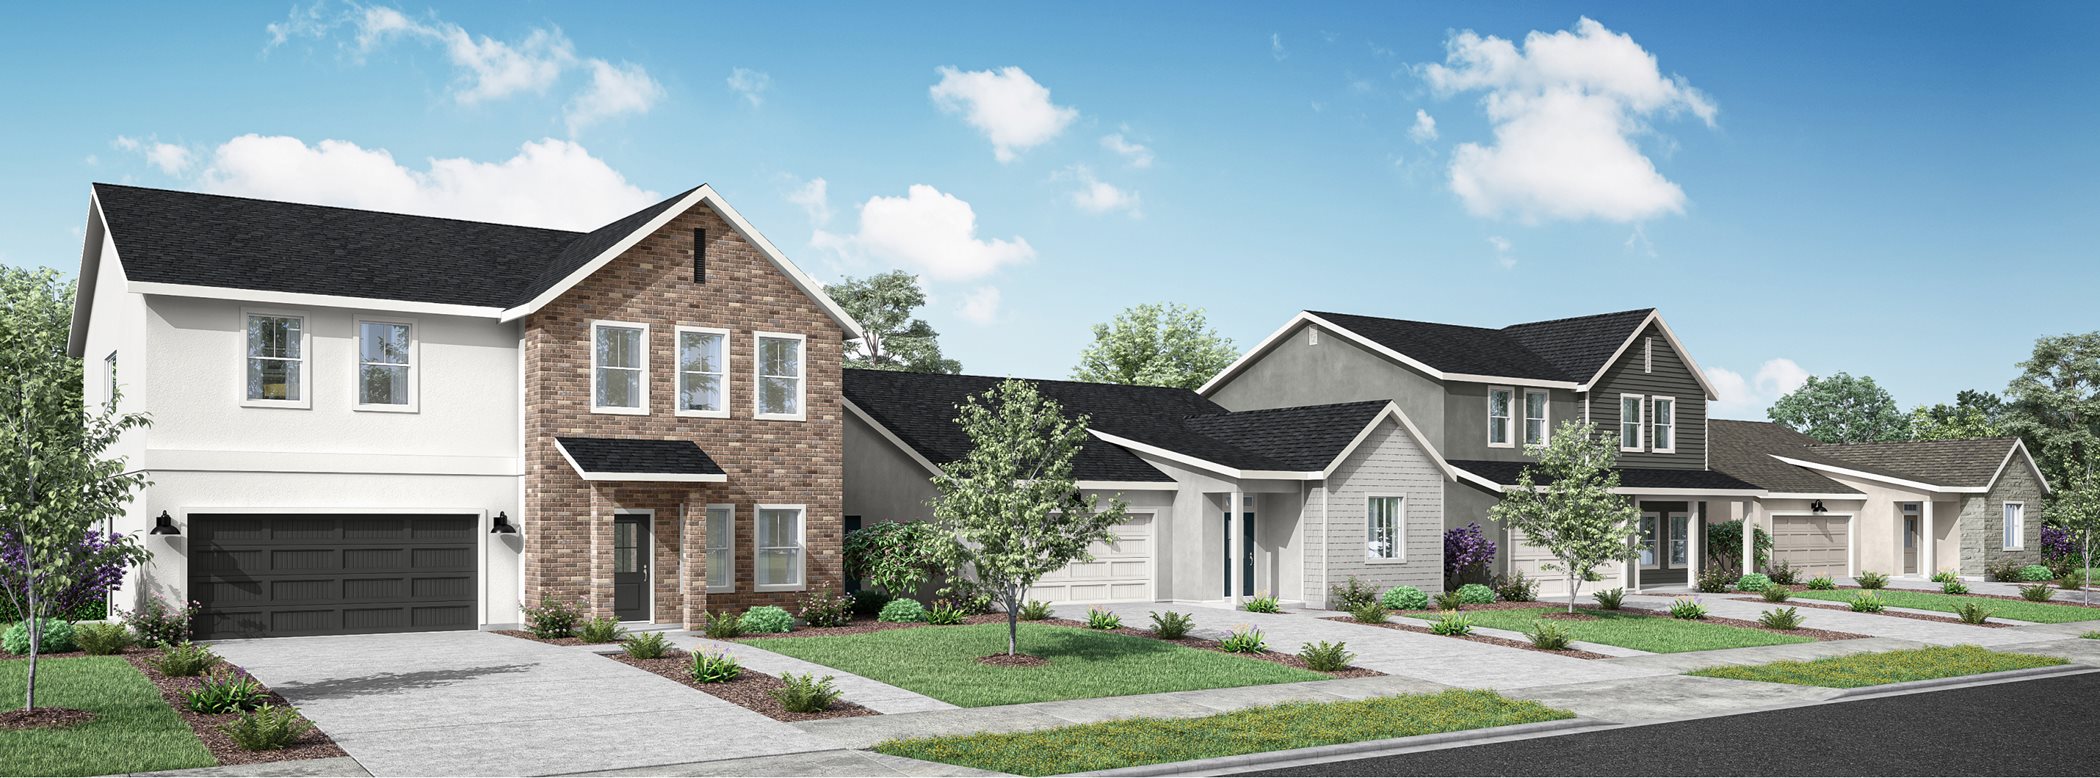 Aerie Pointe Orchard Series Streetscape